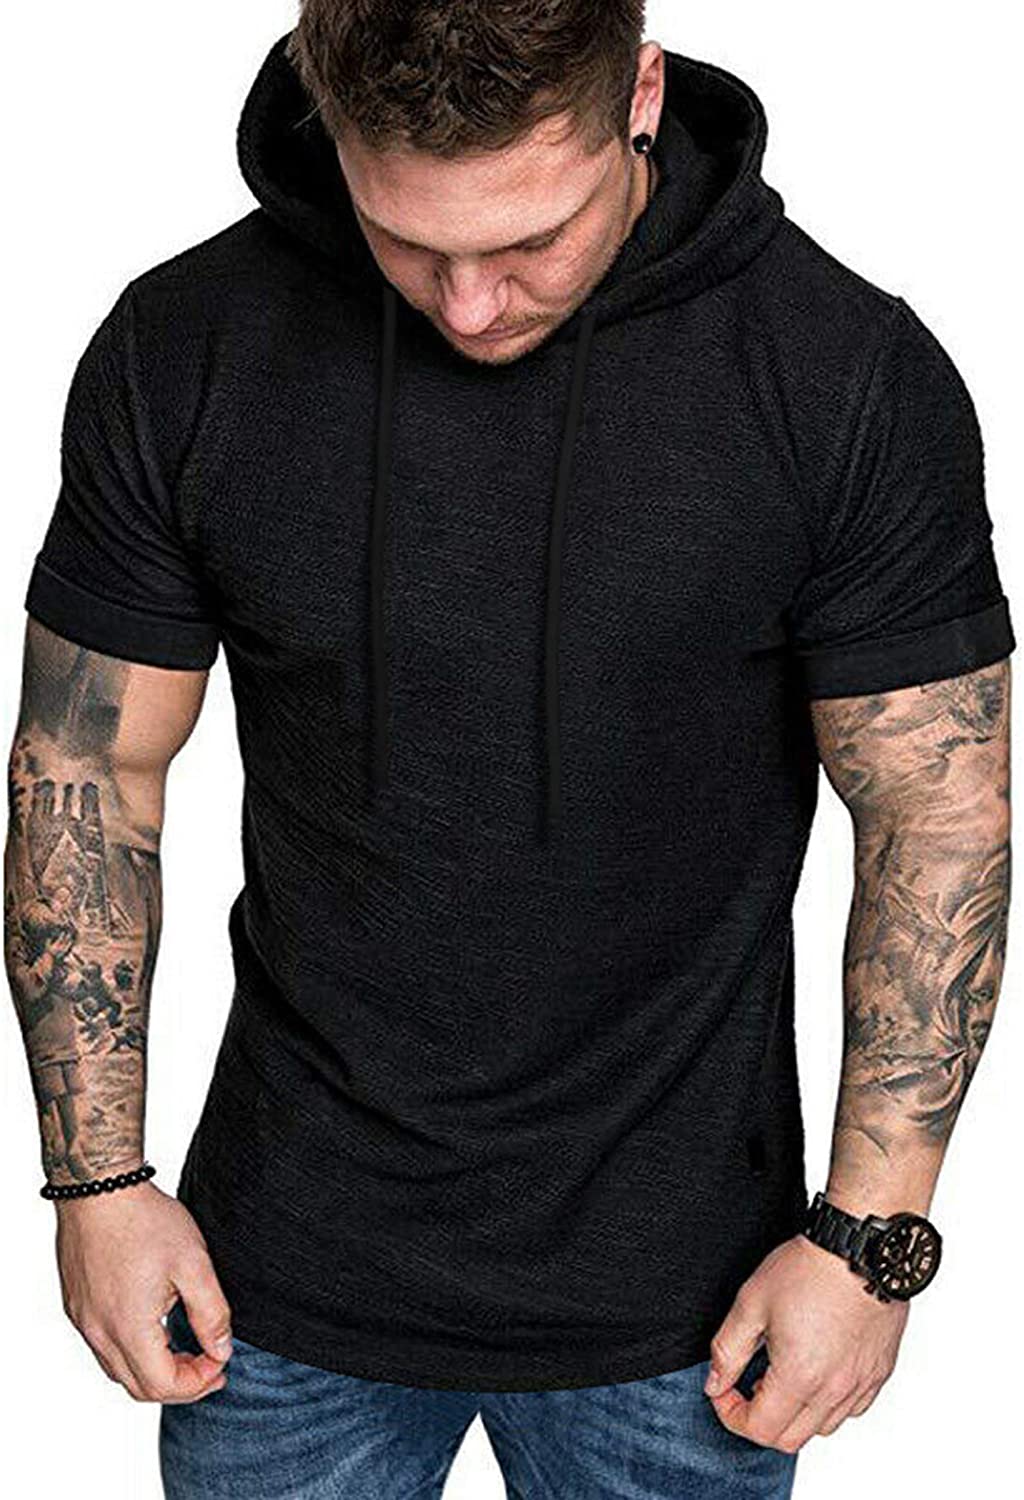 COOFANDY Workout Shirts for Men Muscle T-Shirt Bodybuilding Gym Tee Short Sleeve Hooded Fitted Shirts 